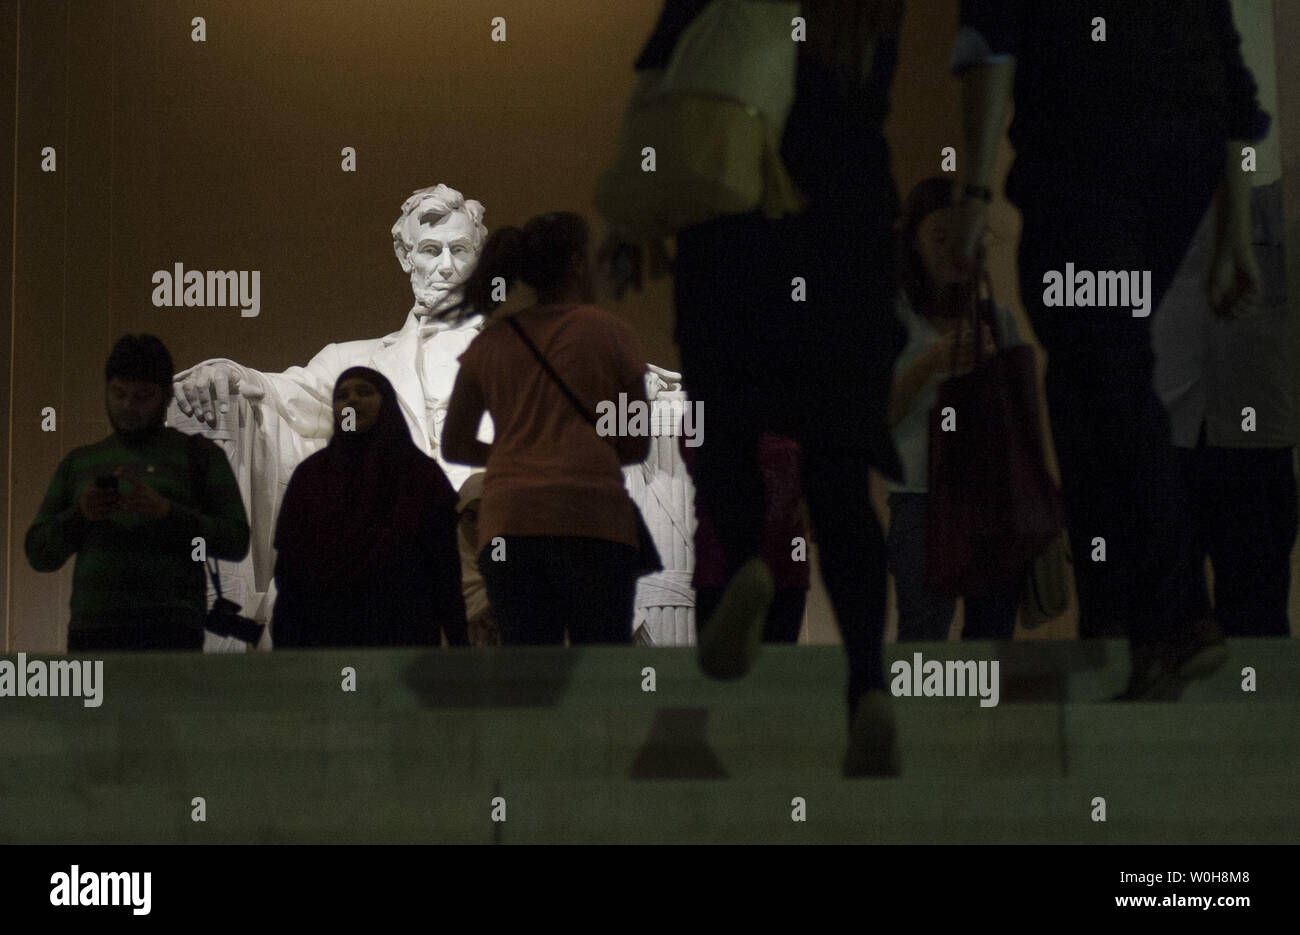 Tourists visit the Lincoln memorial on the first night that the Memorial was reopened after a 16-day partial government shutdown closed all National Parks and Monuments, on October 17, 2013 in Washington, DC. A bipartisan funding bill was passed by the House and the Senate and signed by President Obama to reopened the government and raise the debt limit. UPI/Kevin Dietsch Stock Photo